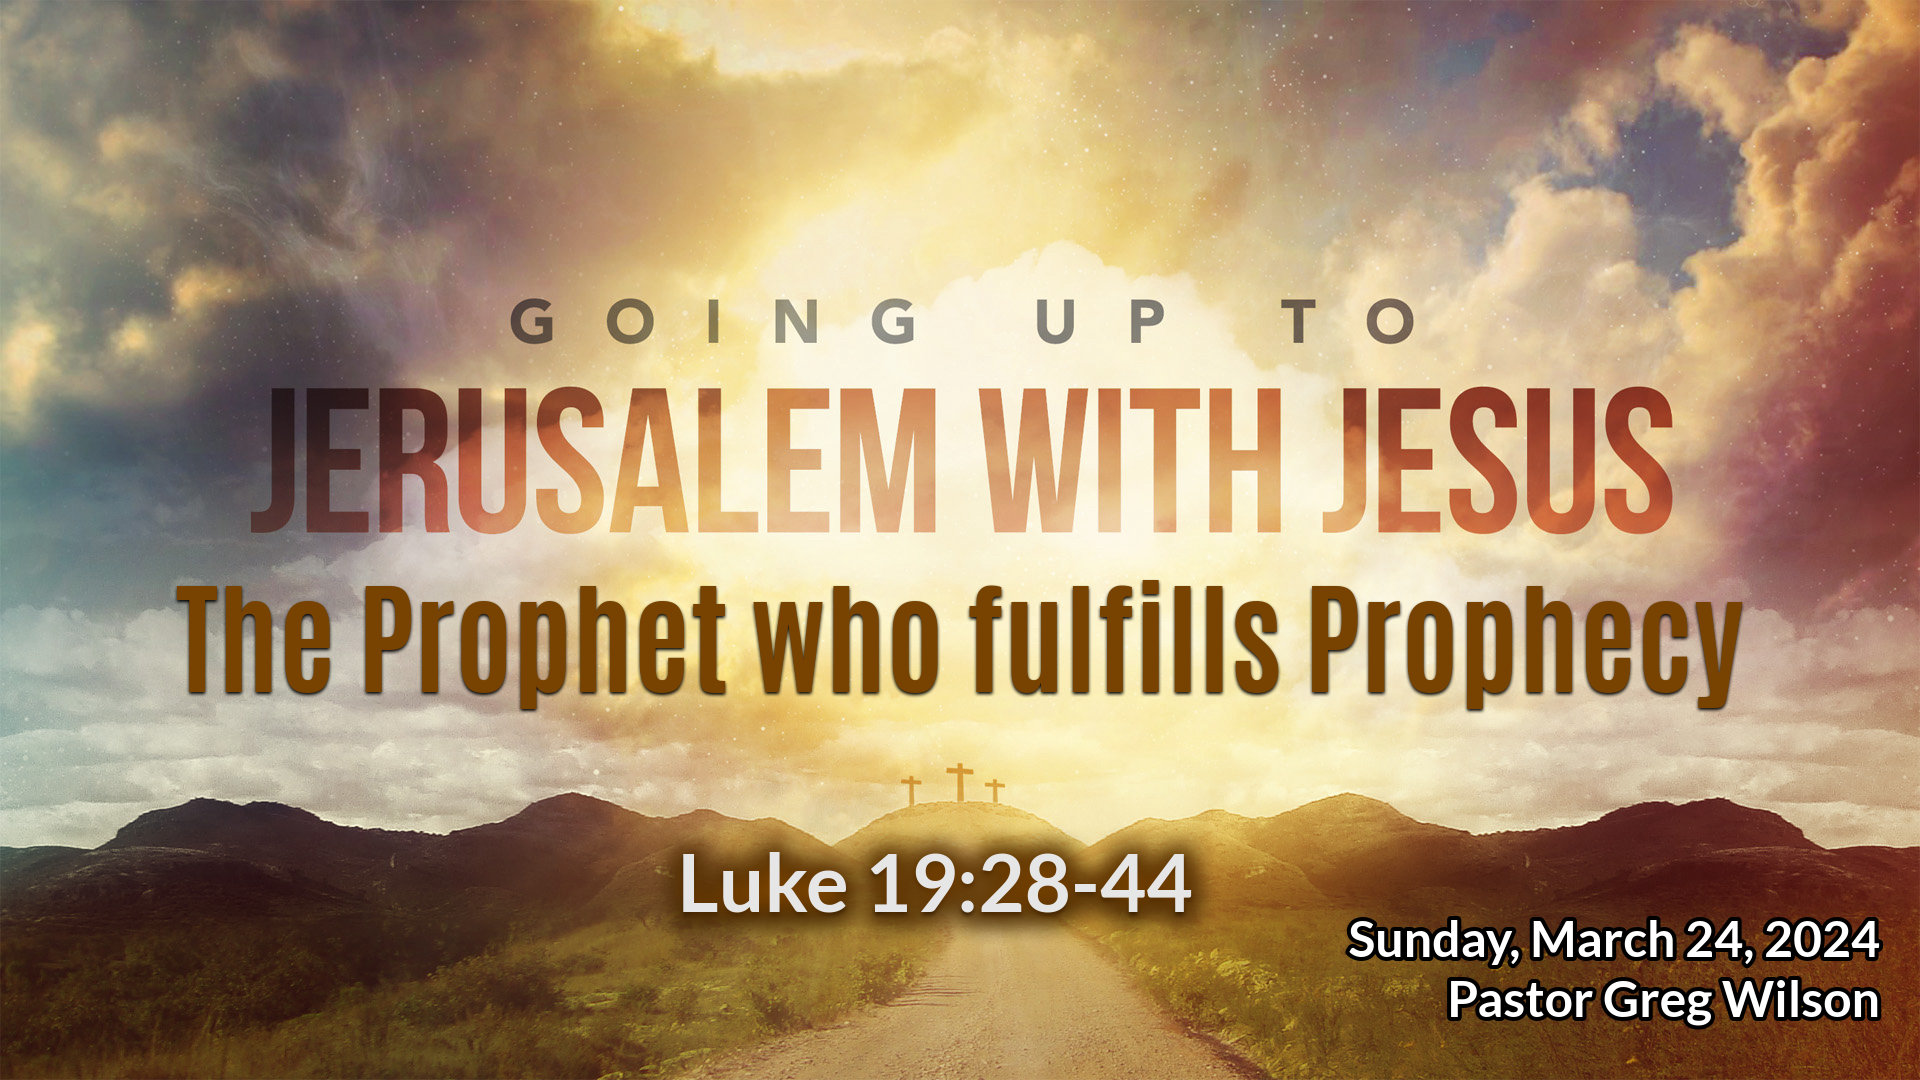 "The Prophet who fulfills Prophecy"